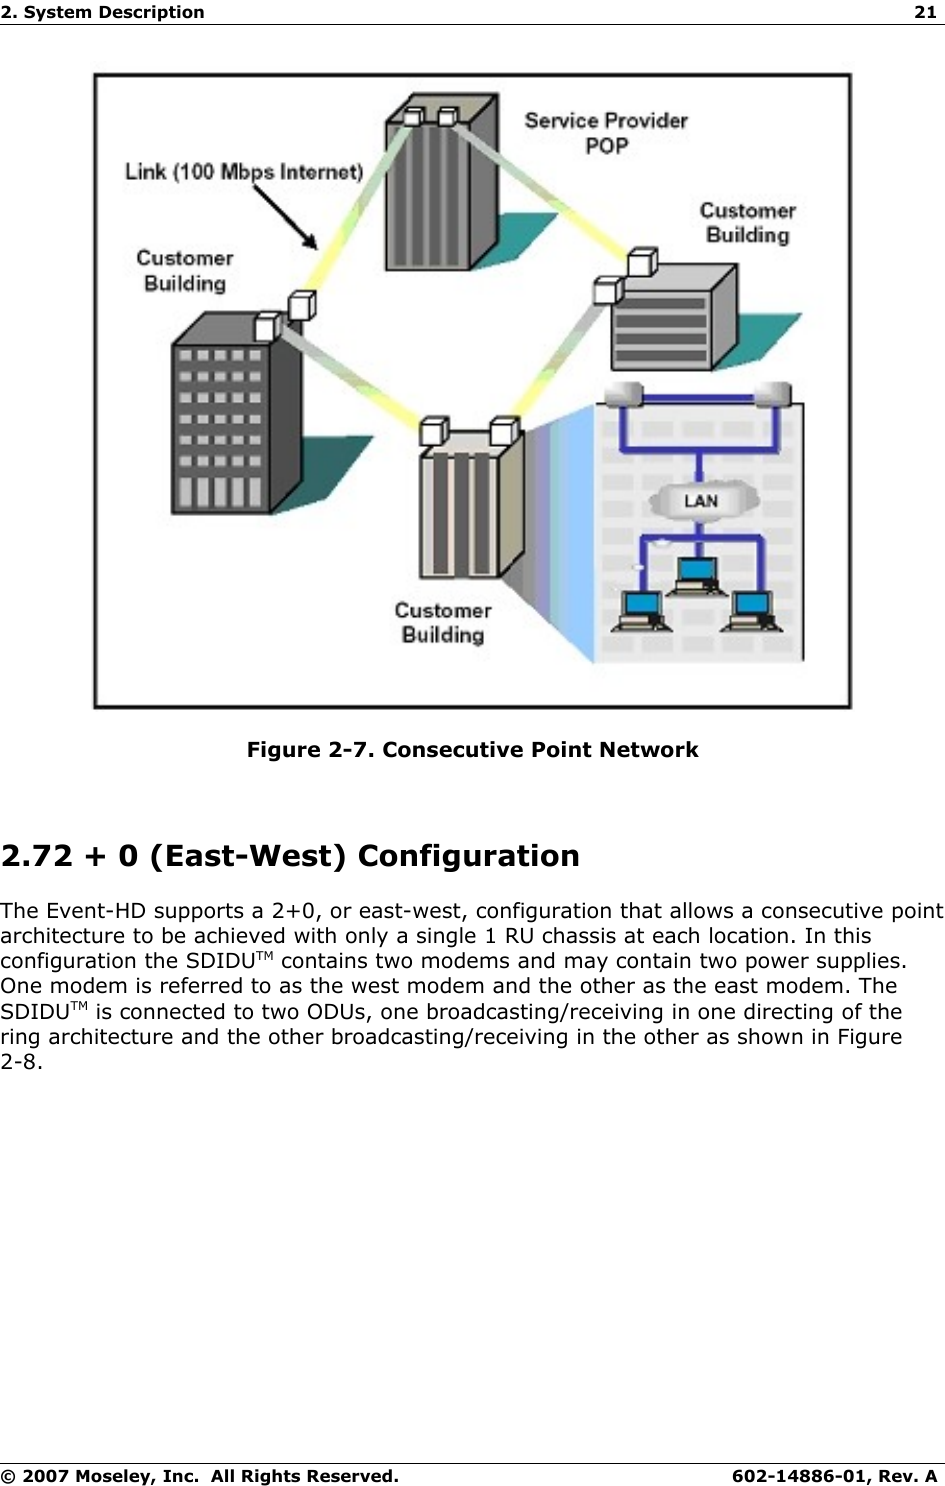 2. System Description 21Figure 2-7. Consecutive Point Network2.72 + 0 (East-West) Configuration The Event-HD supports a 2+0, or east-west, configuration that allows a consecutive point architecture to be achieved with only a single 1 RU chassis at each location. In this configuration the SDIDUTM contains two modems and may contain two power supplies. One modem is referred to as the west modem and the other as the east modem. The SDIDUTM is connected to two ODUs, one broadcasting/receiving in one directing of the ring architecture and the other broadcasting/receiving in the other as shown in Figure 2-8.© 2007 Moseley, Inc.  All Rights Reserved. 602-14886-01, Rev. A